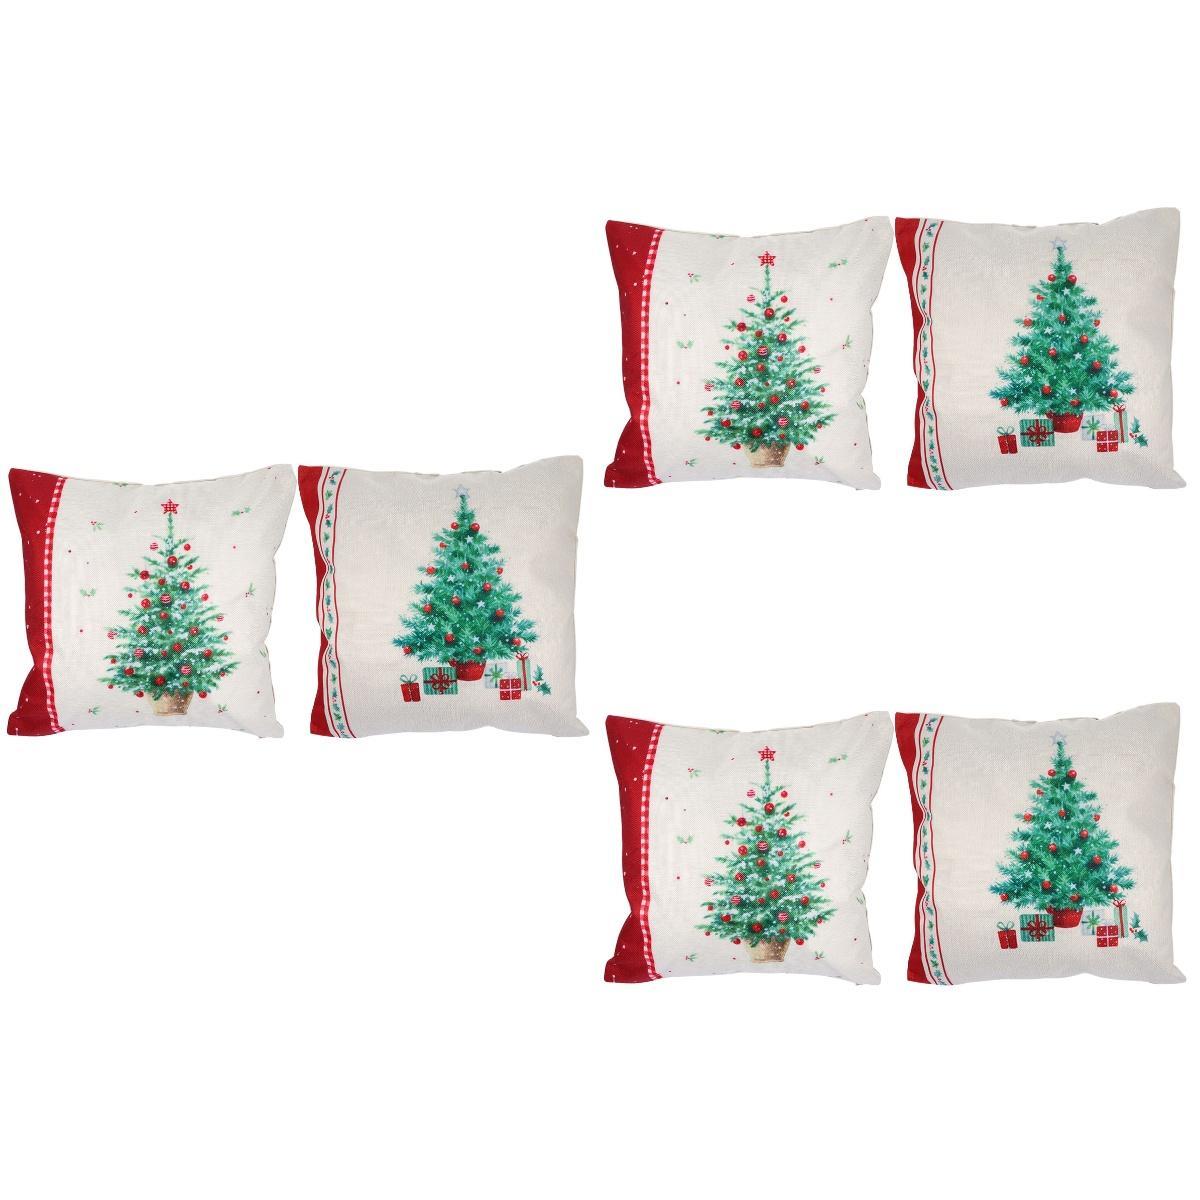 6 Christmas Cushion Covers Winter Pillow Covers Fabric Pillow Covers Hug Pillow Case